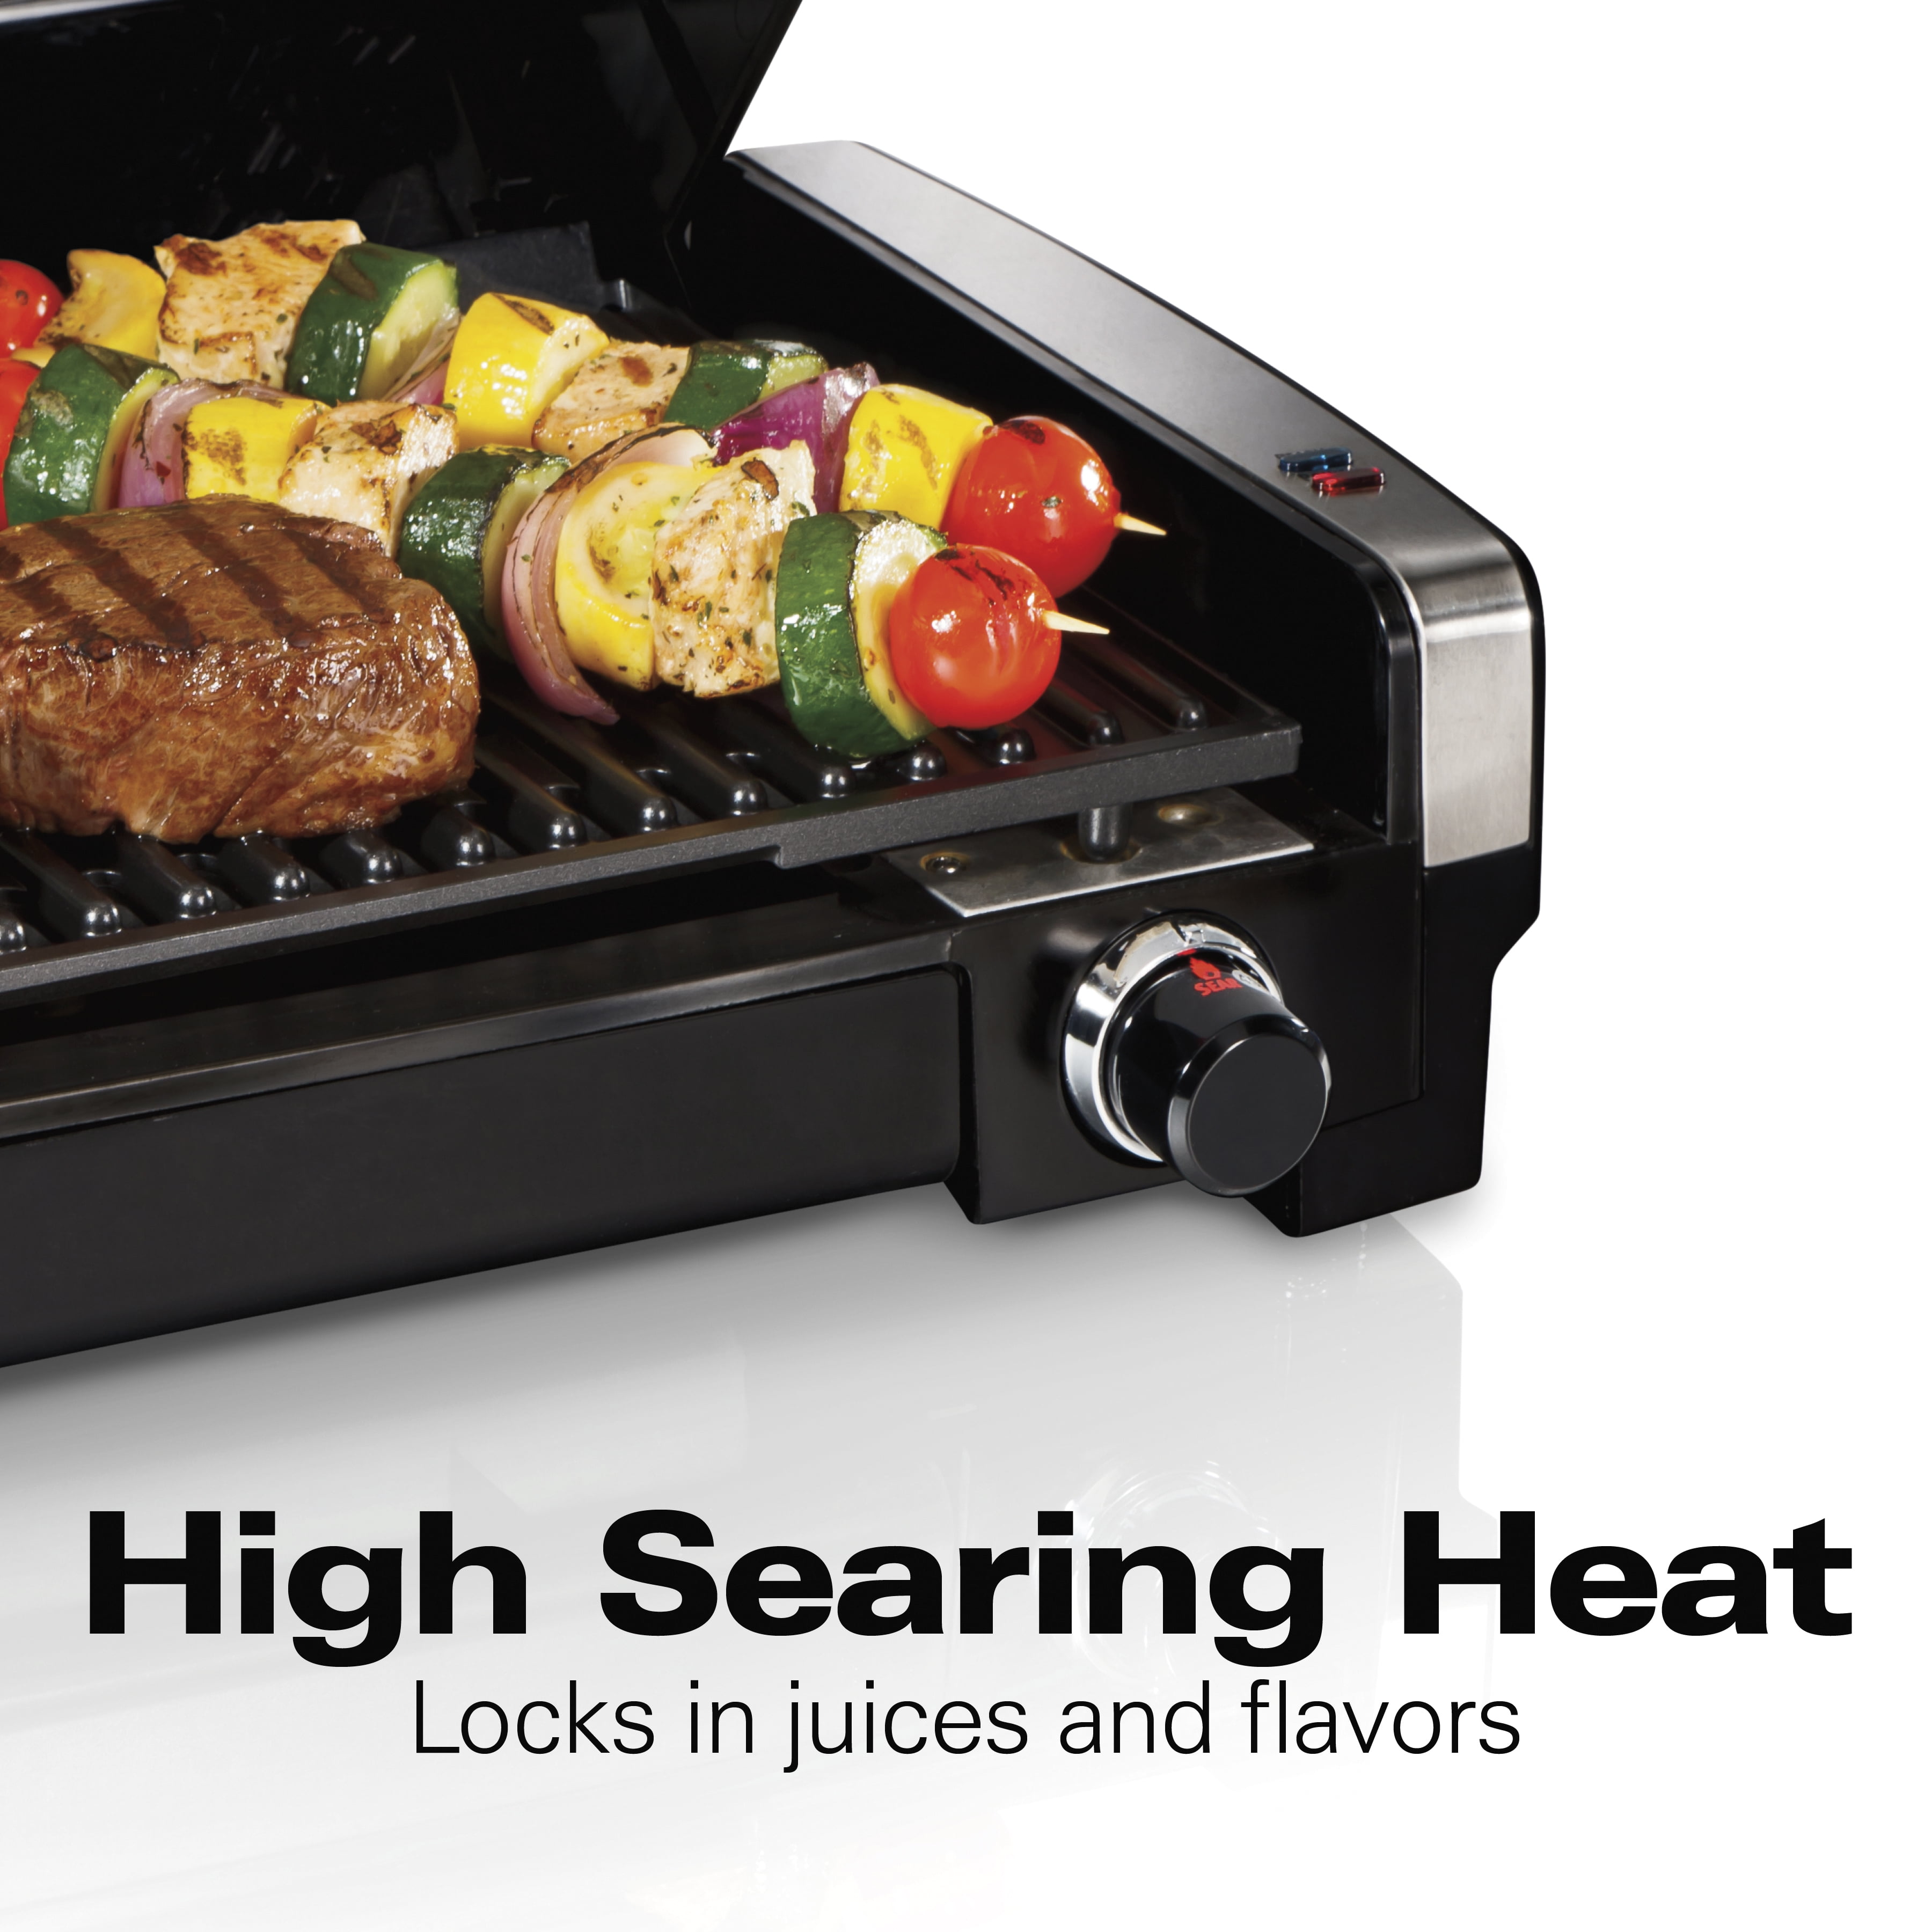  Hamilton Beach Steak Lover's Electric Indoor Searing Grill,  Nonstick 100 Square, Stainless Steel (25331), Black and Stainless, Medium:  Electric Contact Grills: Home & Kitchen